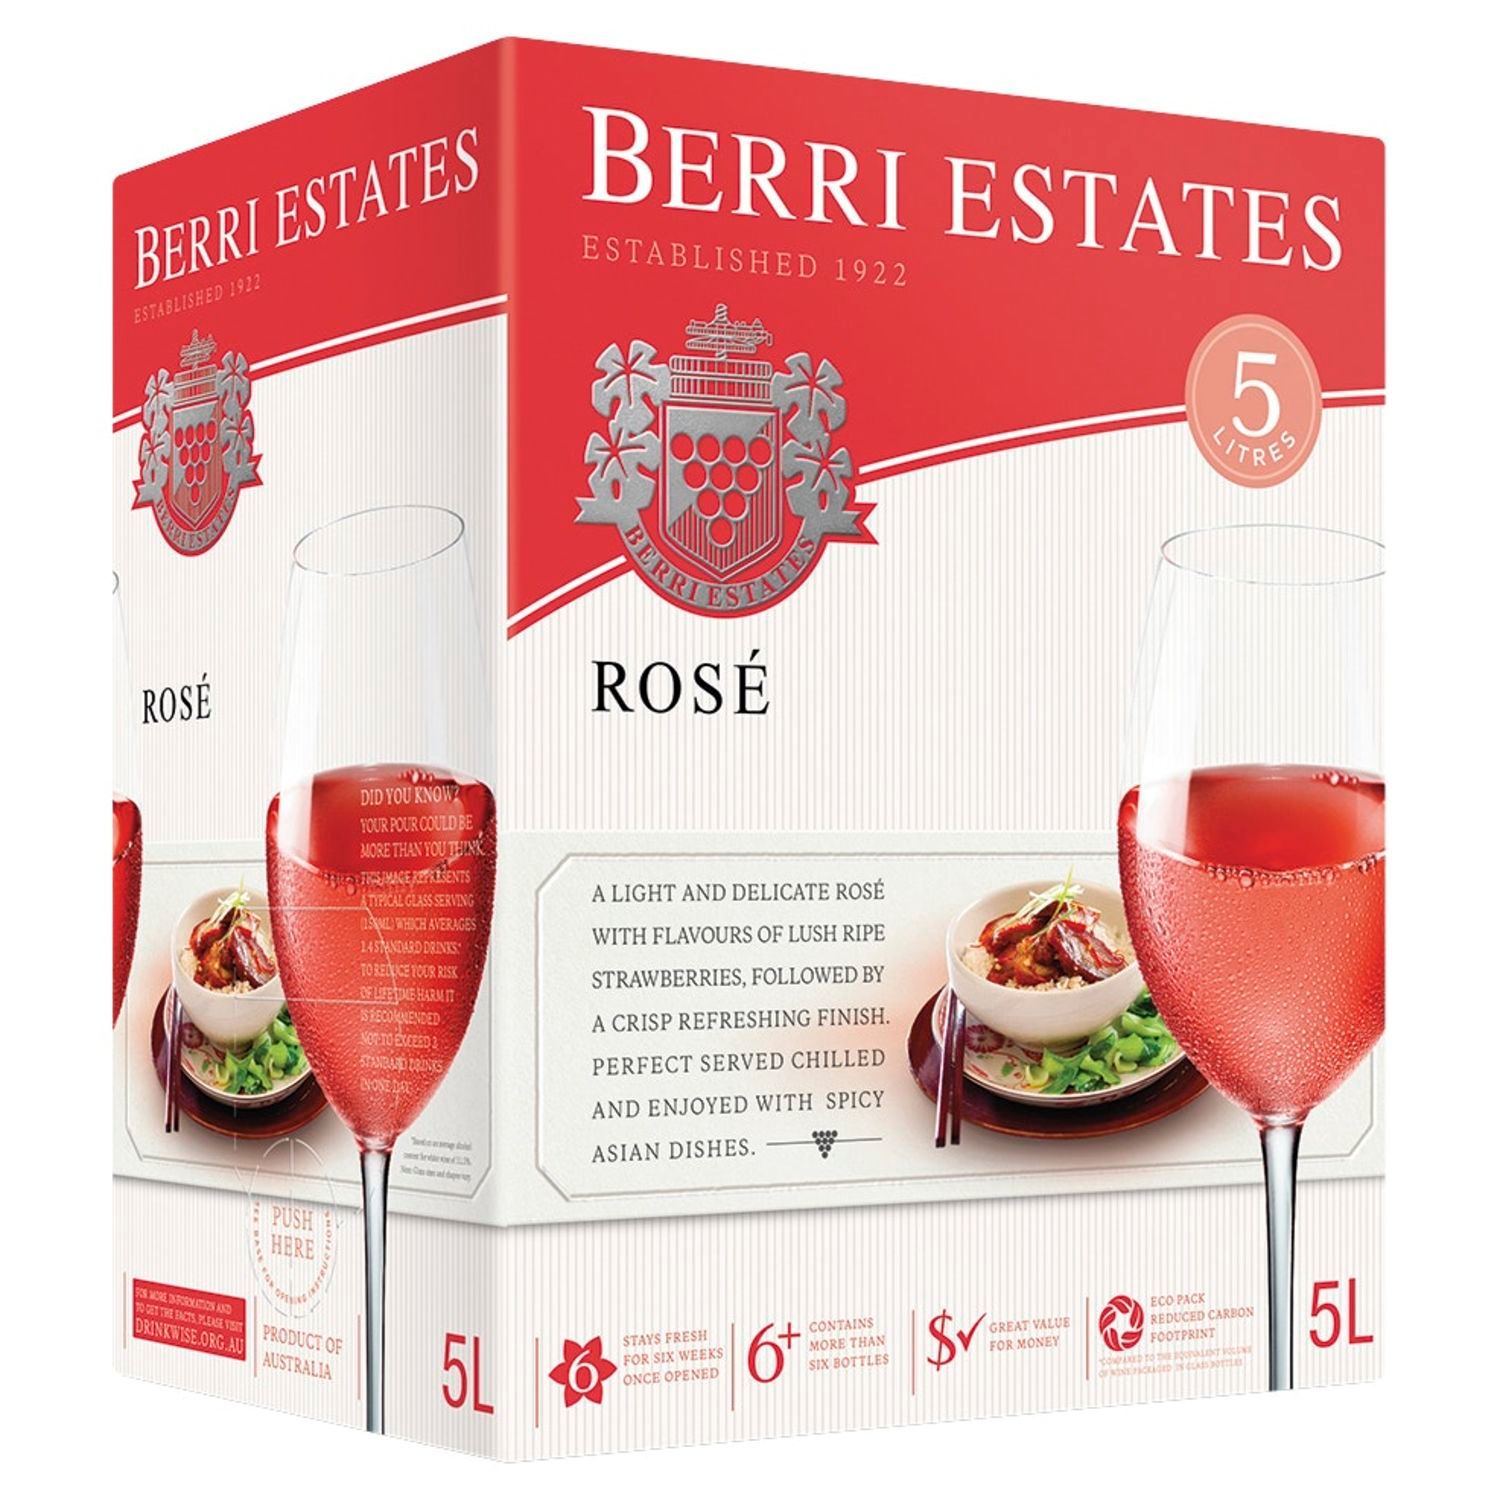 From Berri Estates, this cask aged rose wine is luxuriously light, with plenty of fruity aromas carried through to the palate. Clean on the tongue with an amazing crisp finish, this mouth-watering wine is incredibly easy to drink and goes great with lighter dishes.<br /> <br />Alcohol Volume: 11.00%<br /><br />Pack Format: Cask<br /><br />Standard Drinks: 43.4</br /><br />Pack Type: Cask<br /><br />Country of Origin: Australia<br /><br />Region: South Eastern Australia<br /><br />Vintage: Non Vintage<br />